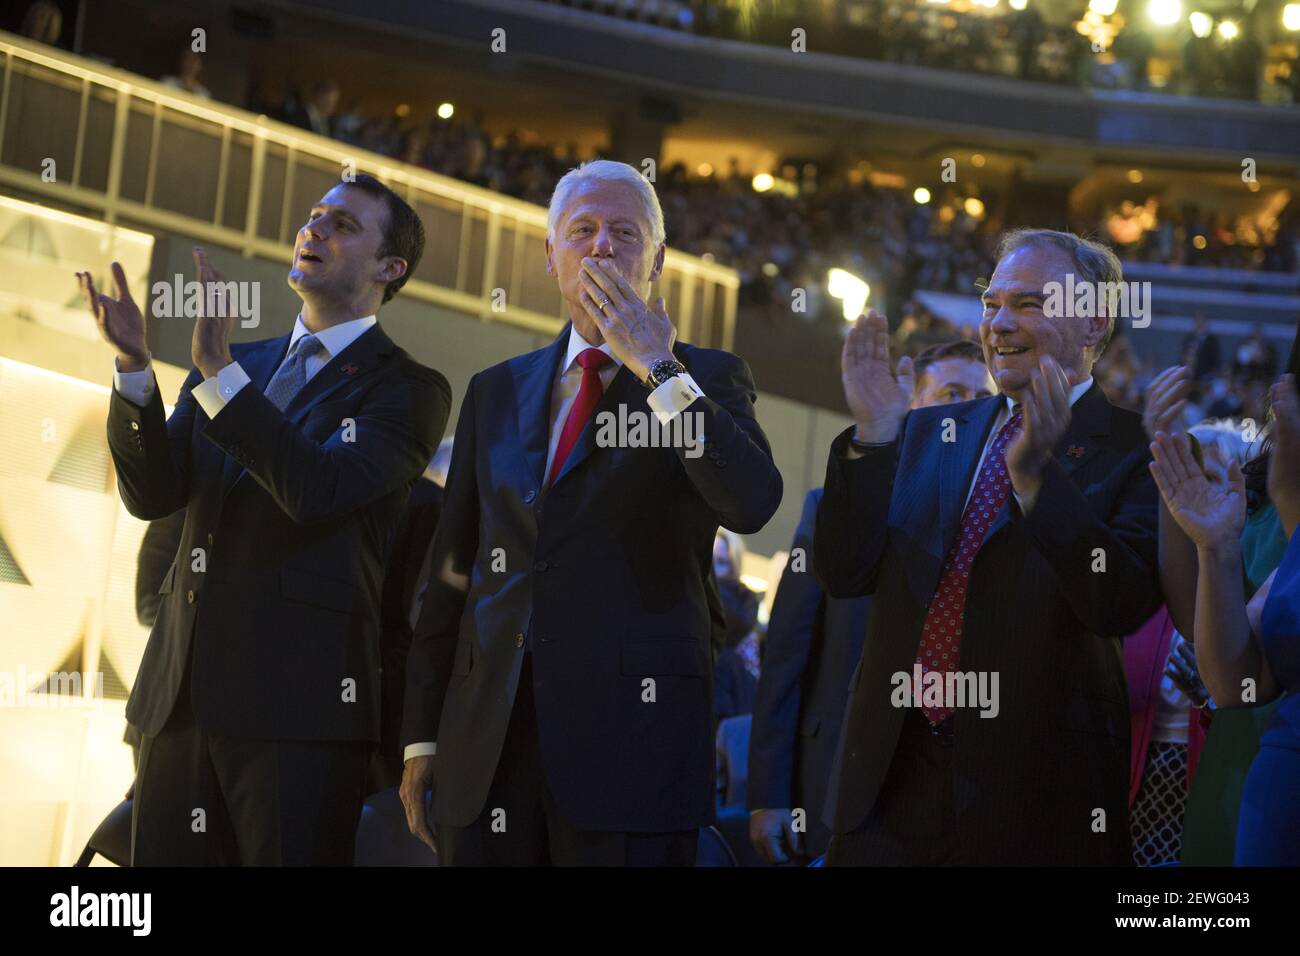 From left, Marc Mezvinsky, his father-in-law, Bill Clinton, and Democratic vice presidential nominee Tim Kaine, appear on the floor of the Wells Fargo Center in Philadelphia, Pa., on the final night of the Democratic National Convention, July 28, 2016.  Stock Photo